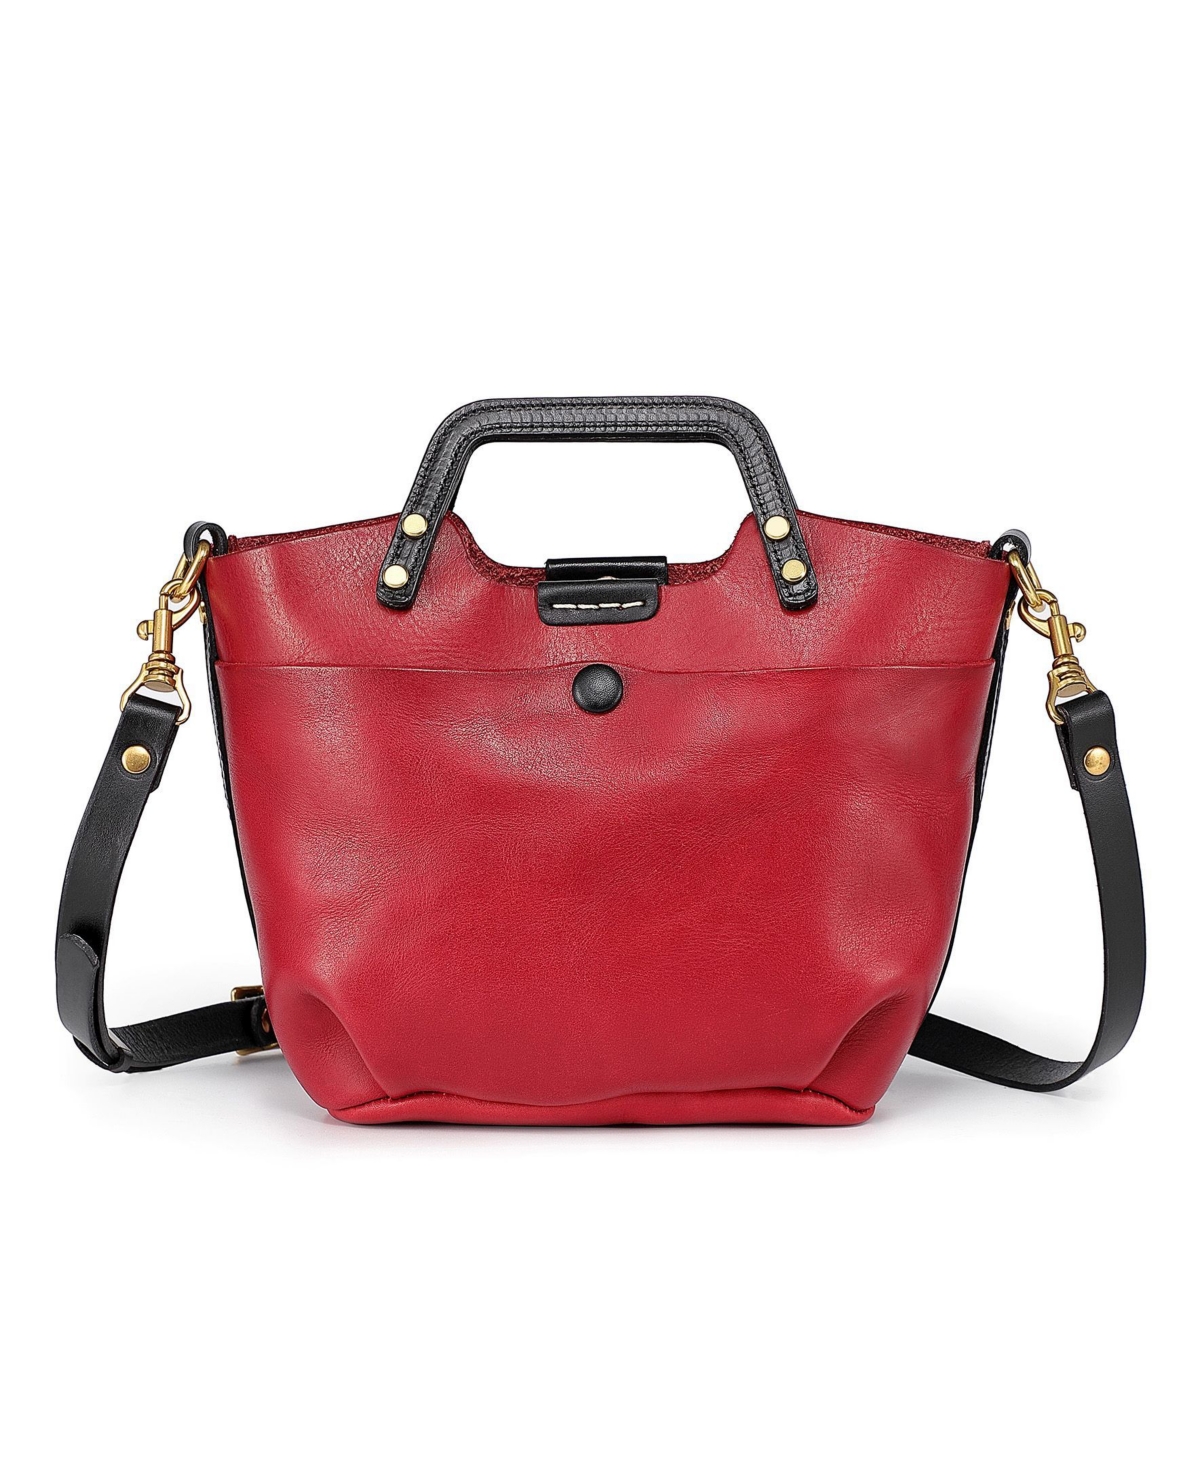 Women's Genuine Leather Sprout Land Mini Tote Bag - Red